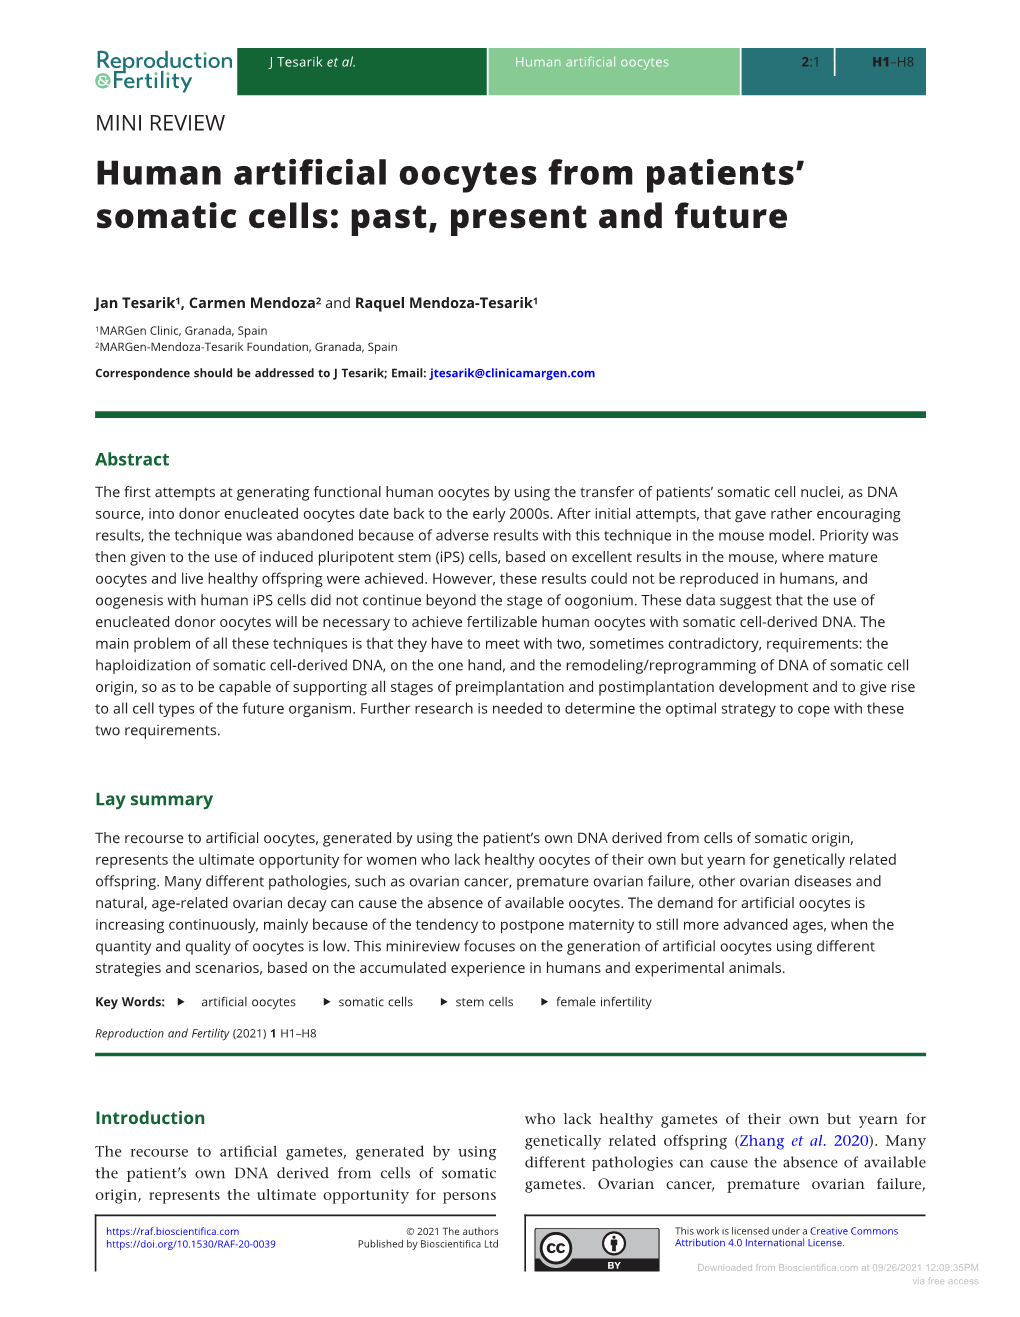 Human Artificial Oocytes from Patients' Somatic Cells: Past, Present and Future